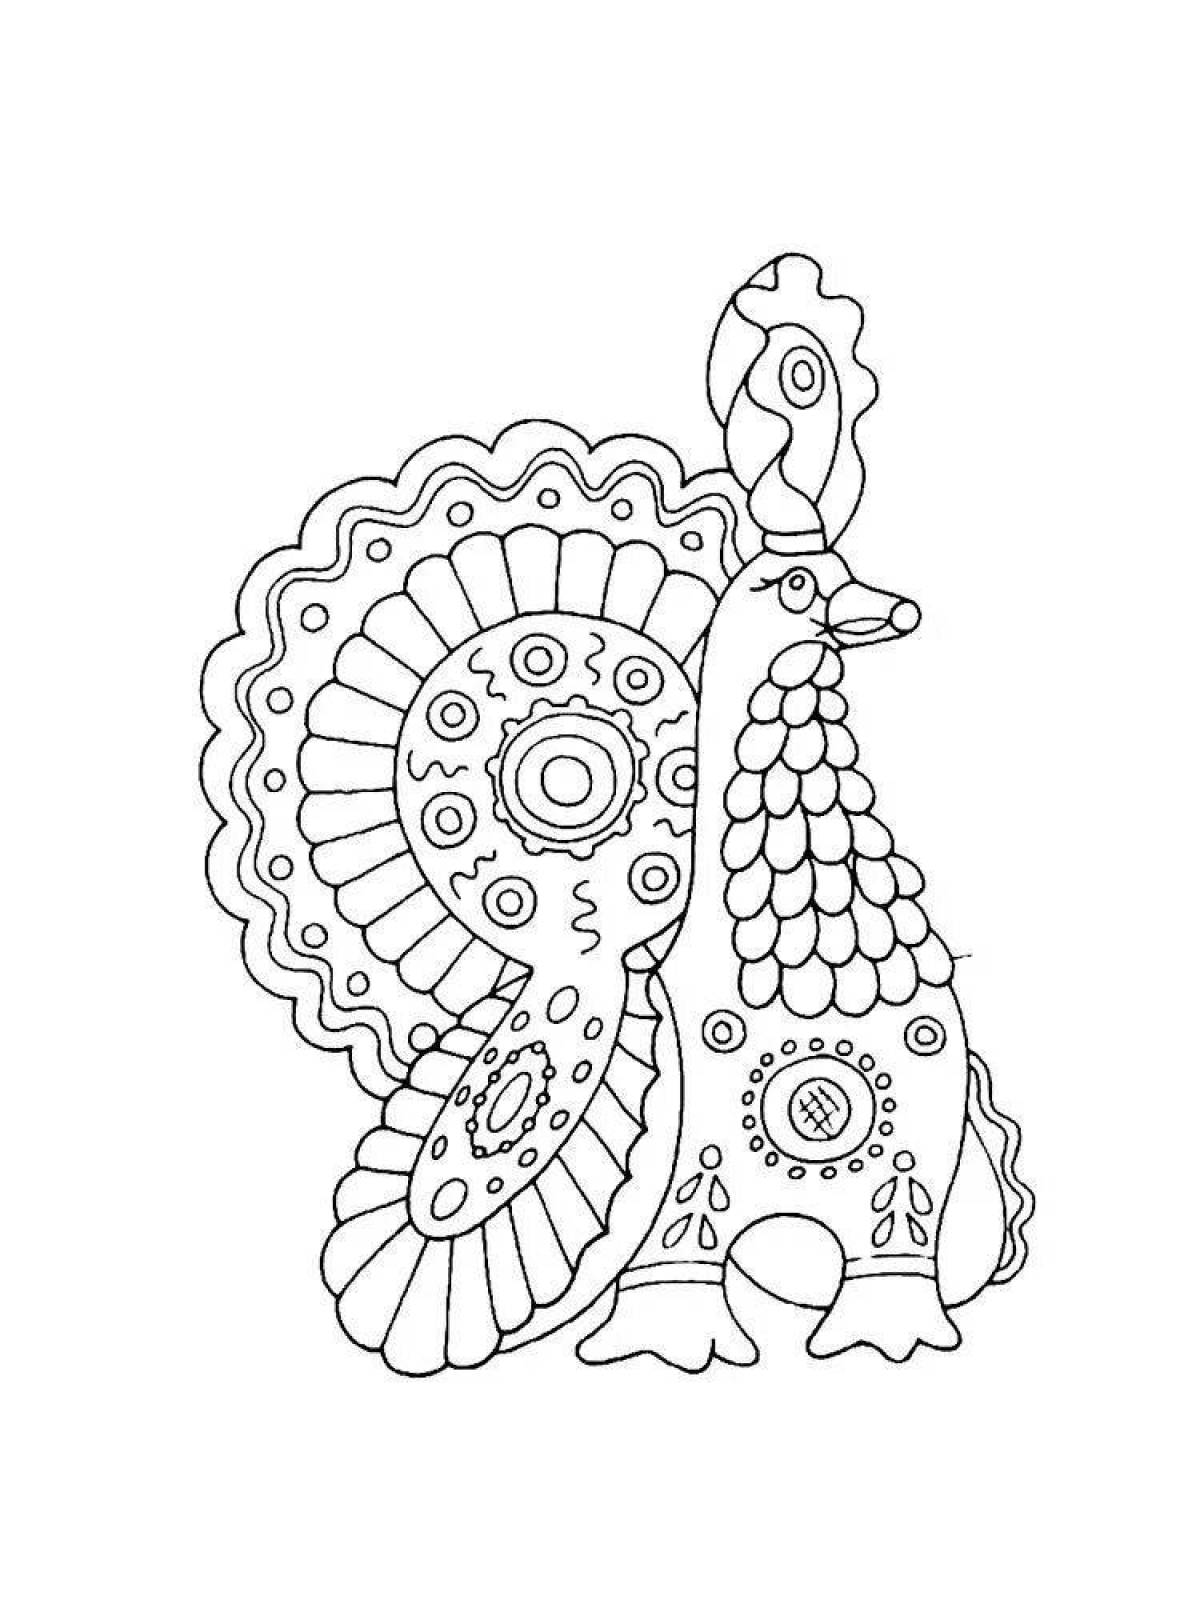 Colorful Dymkovo rooster coloring book